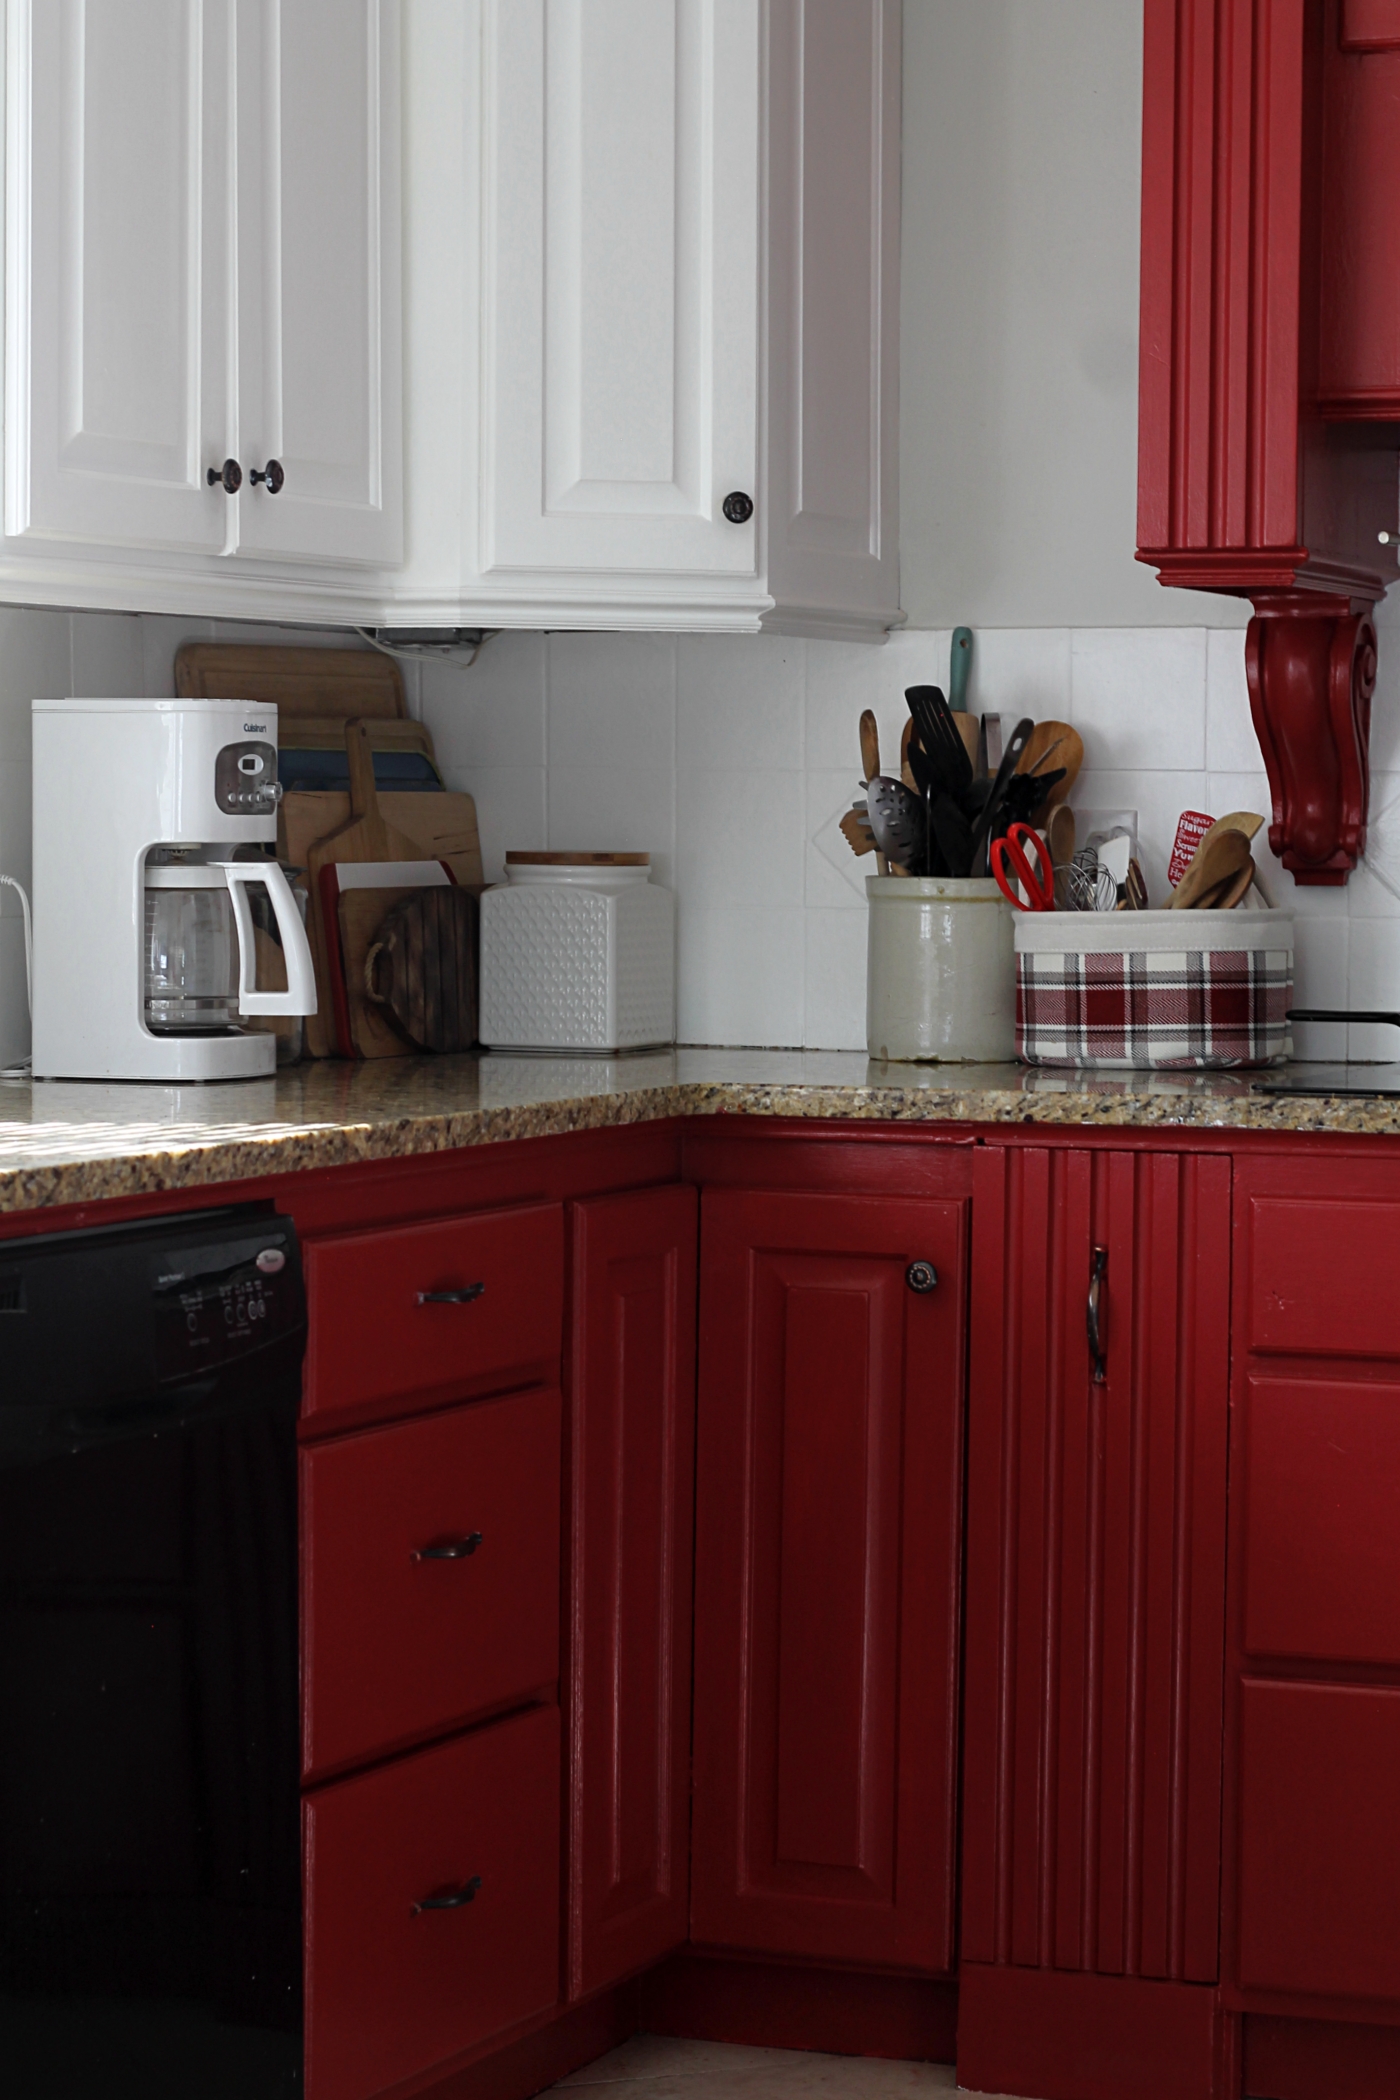 https://thewickerhouse.com/wp-content/uploads/2021/04/red-and-white-cabinets-A.jpg